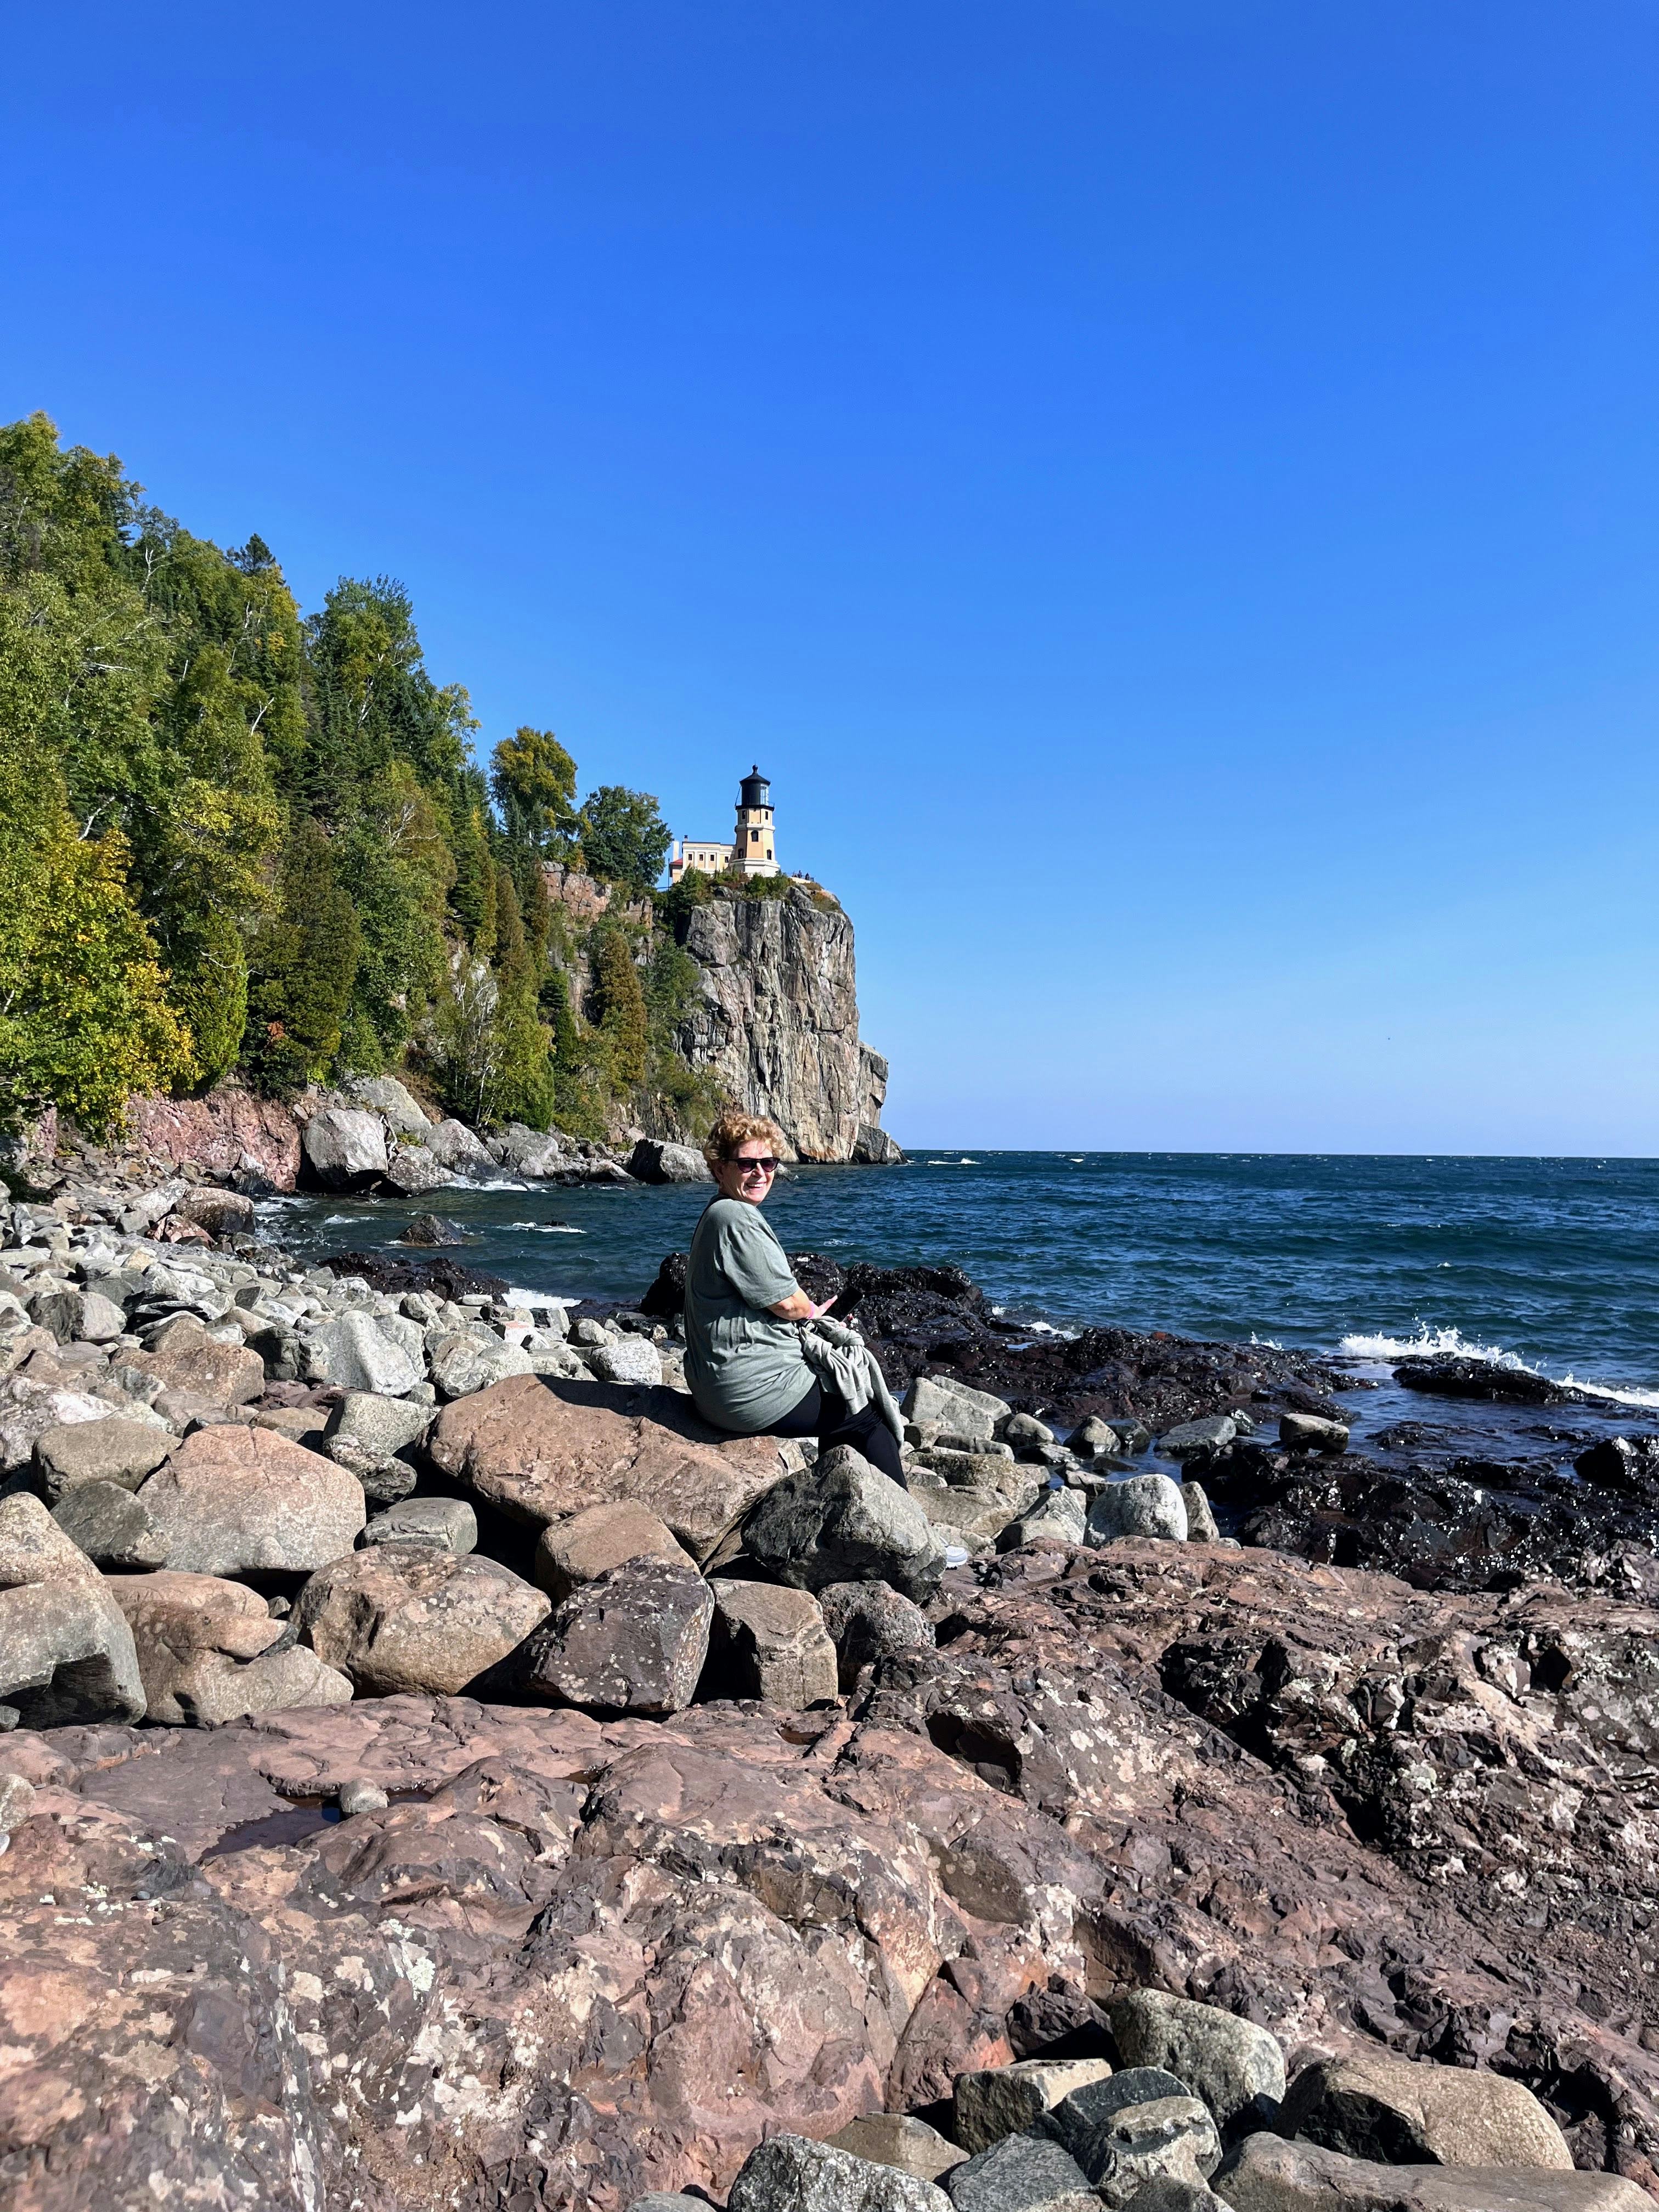 Julie sits in the middle of a rocky beach. In the background, the wooded coast line rises to a towering rock topped by a yellow lighthouse